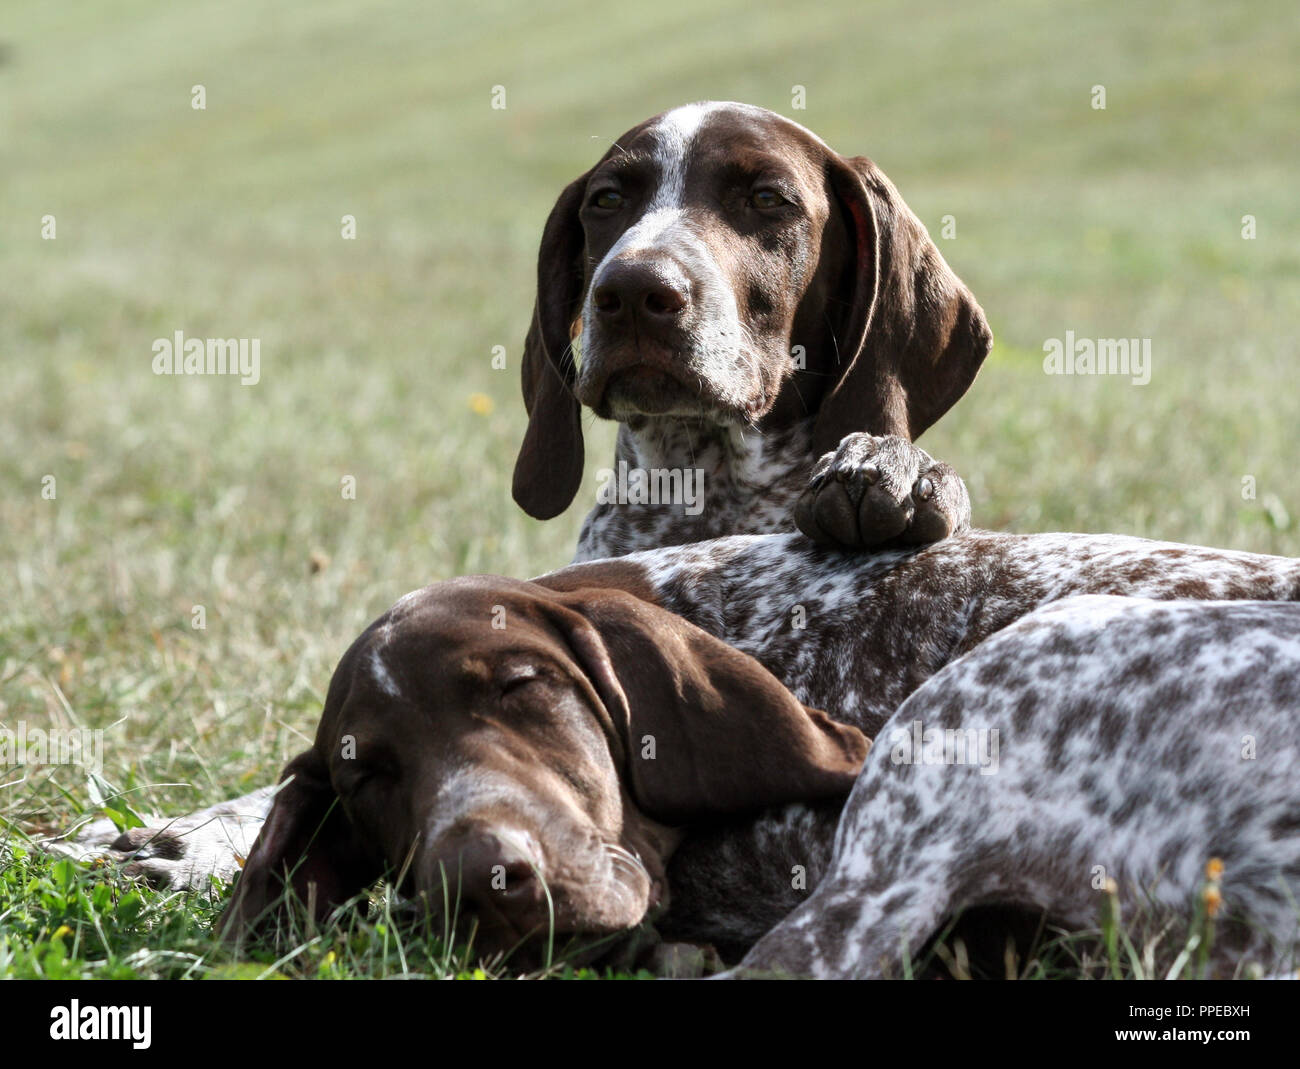 german shorthaired pointer, kurtshaar two brown spotted puppy, portrait two animals, one asleep with his head on grass, second one puts his paw on Stock Photo